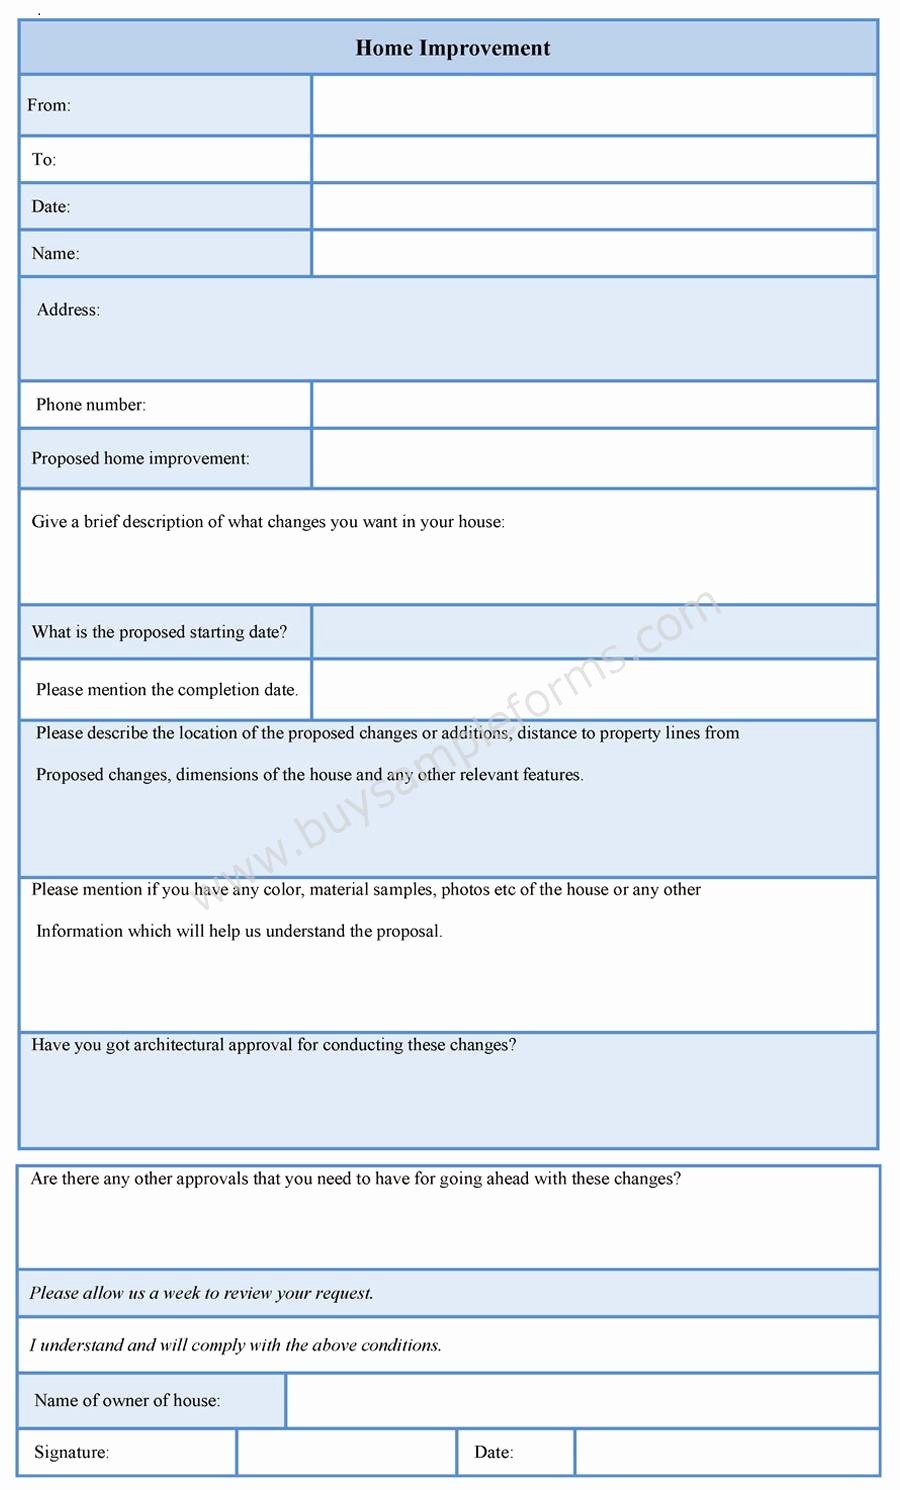 Home Improvement Contract Template Beautiful Home Improvement form